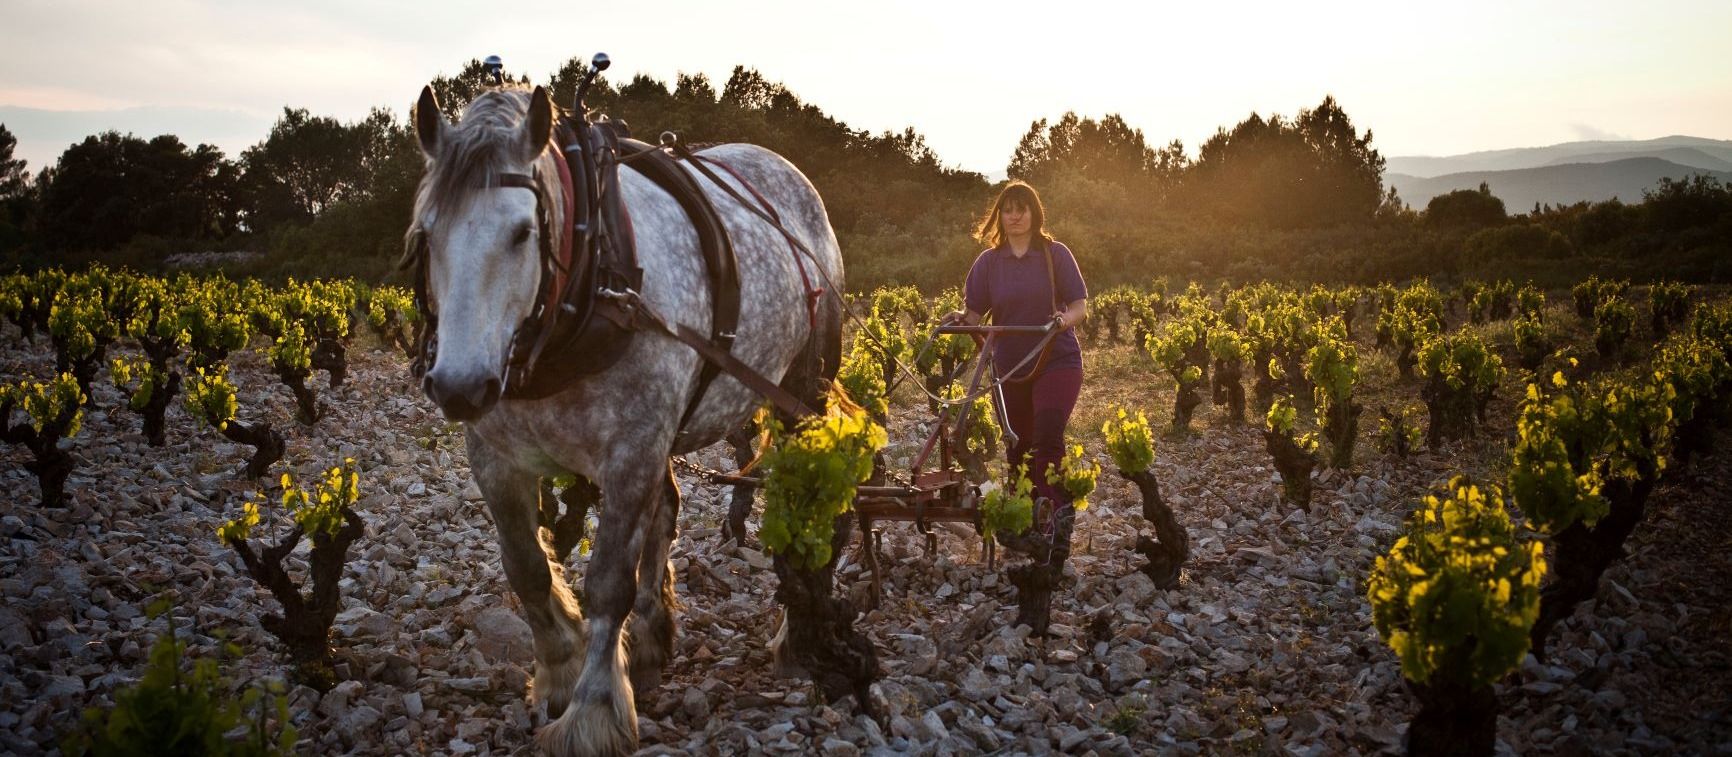 French Organics: Wine producers looking for UK distribution